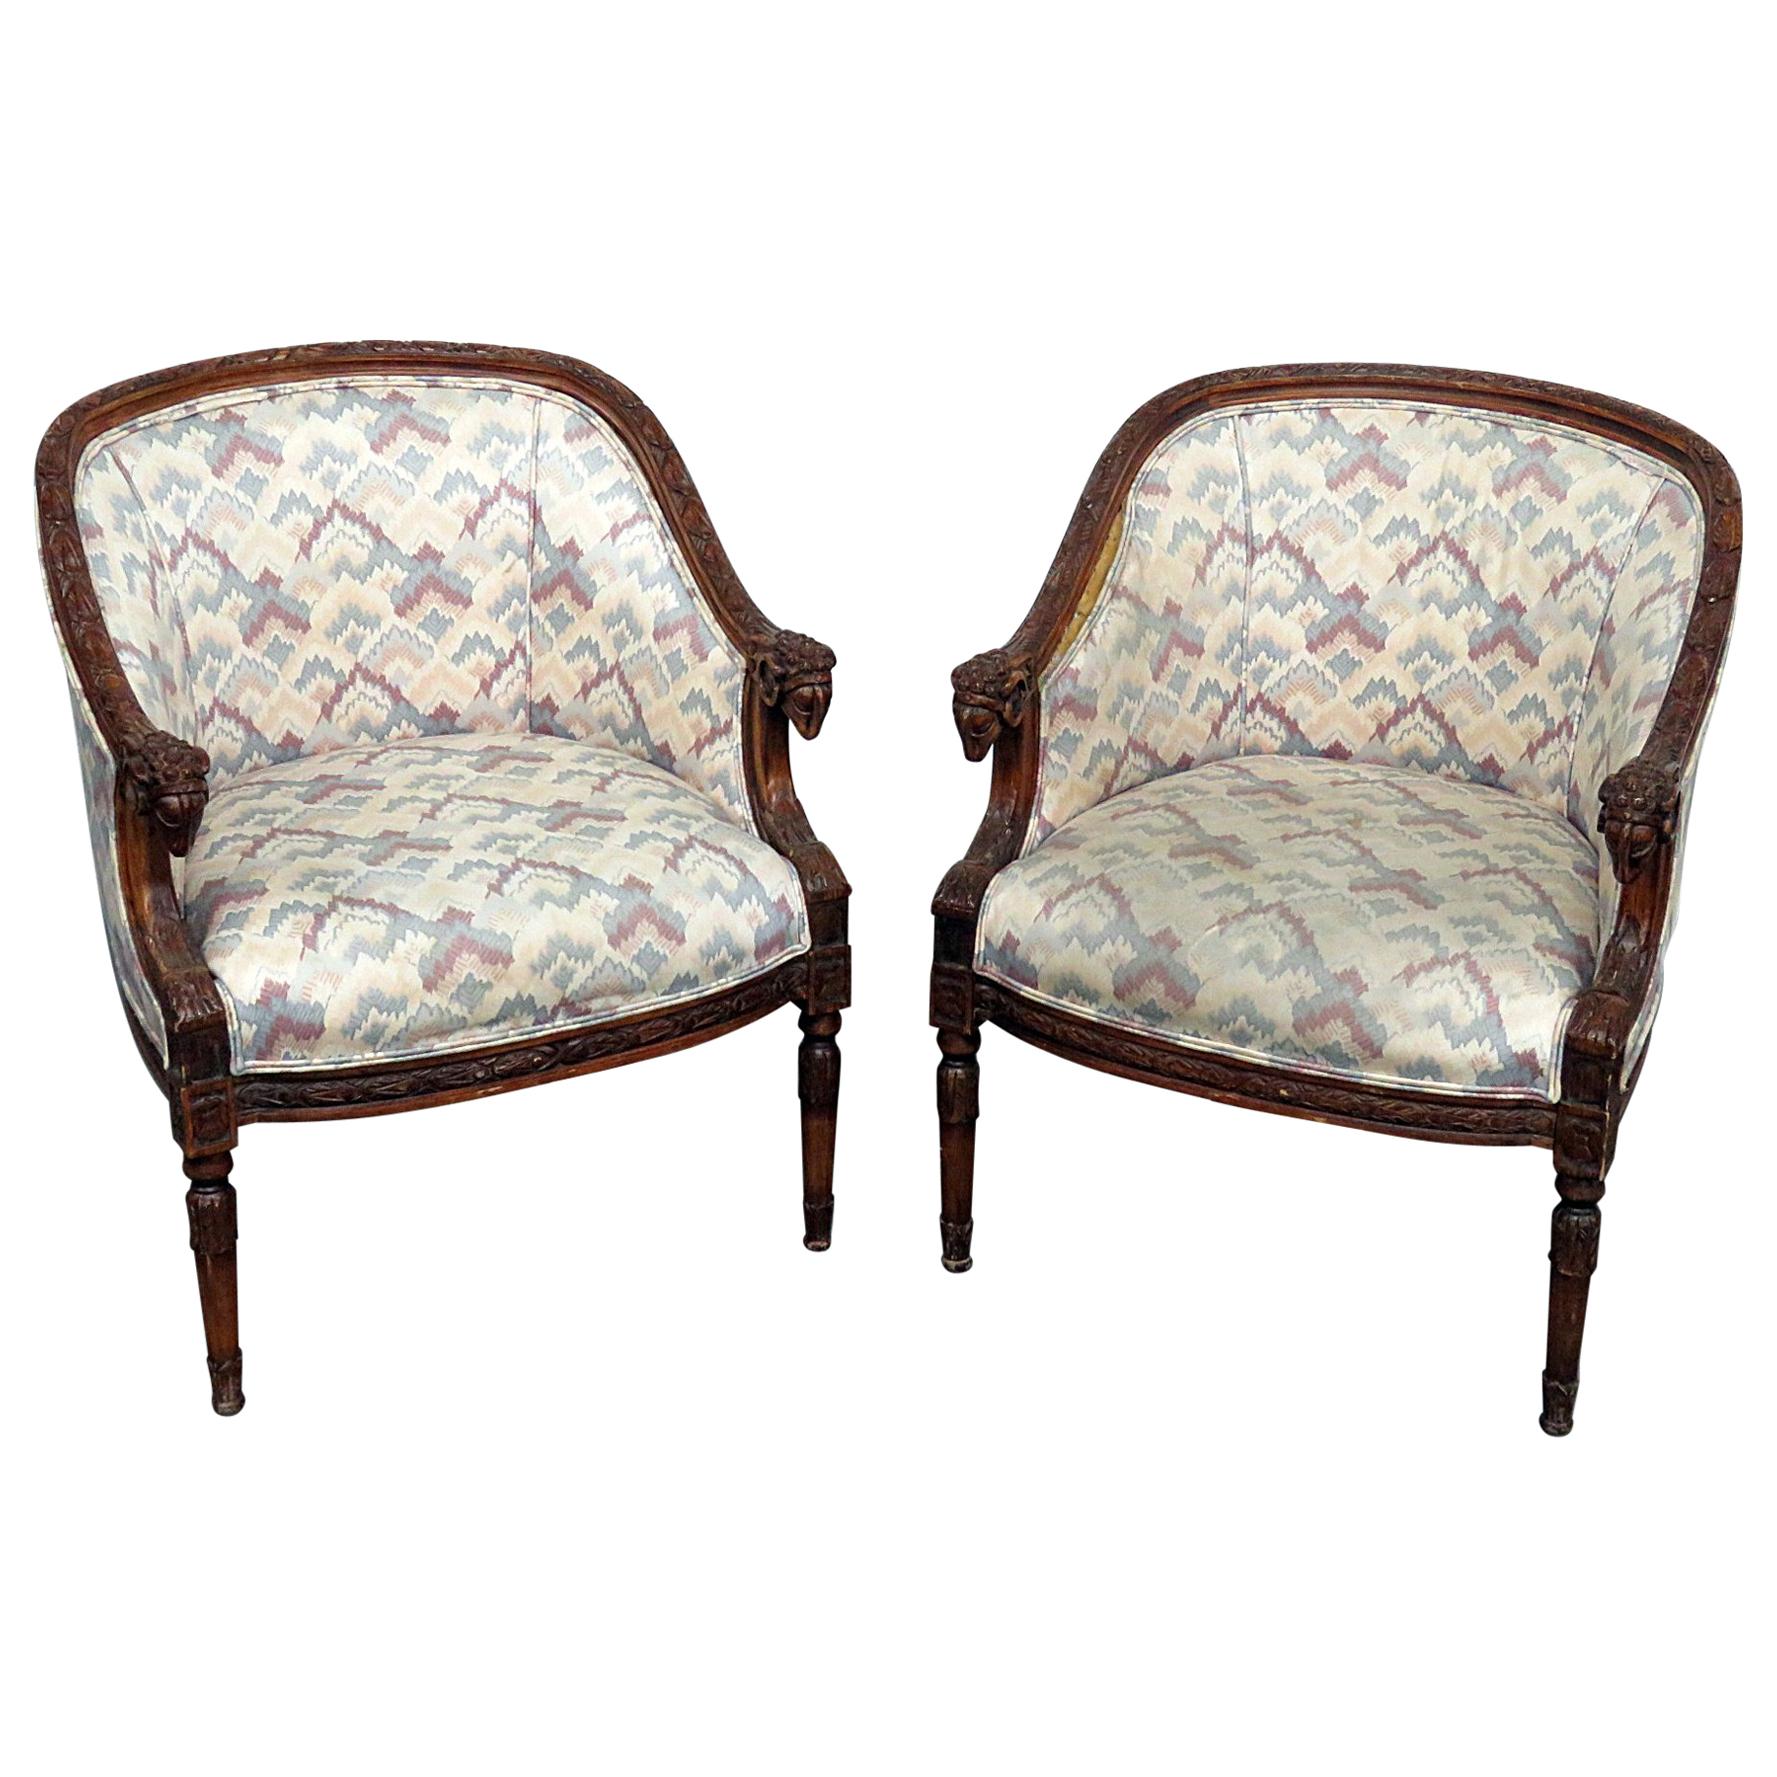 Pair of French Carved Mahogany Rams Head Bergere chairs C1940s